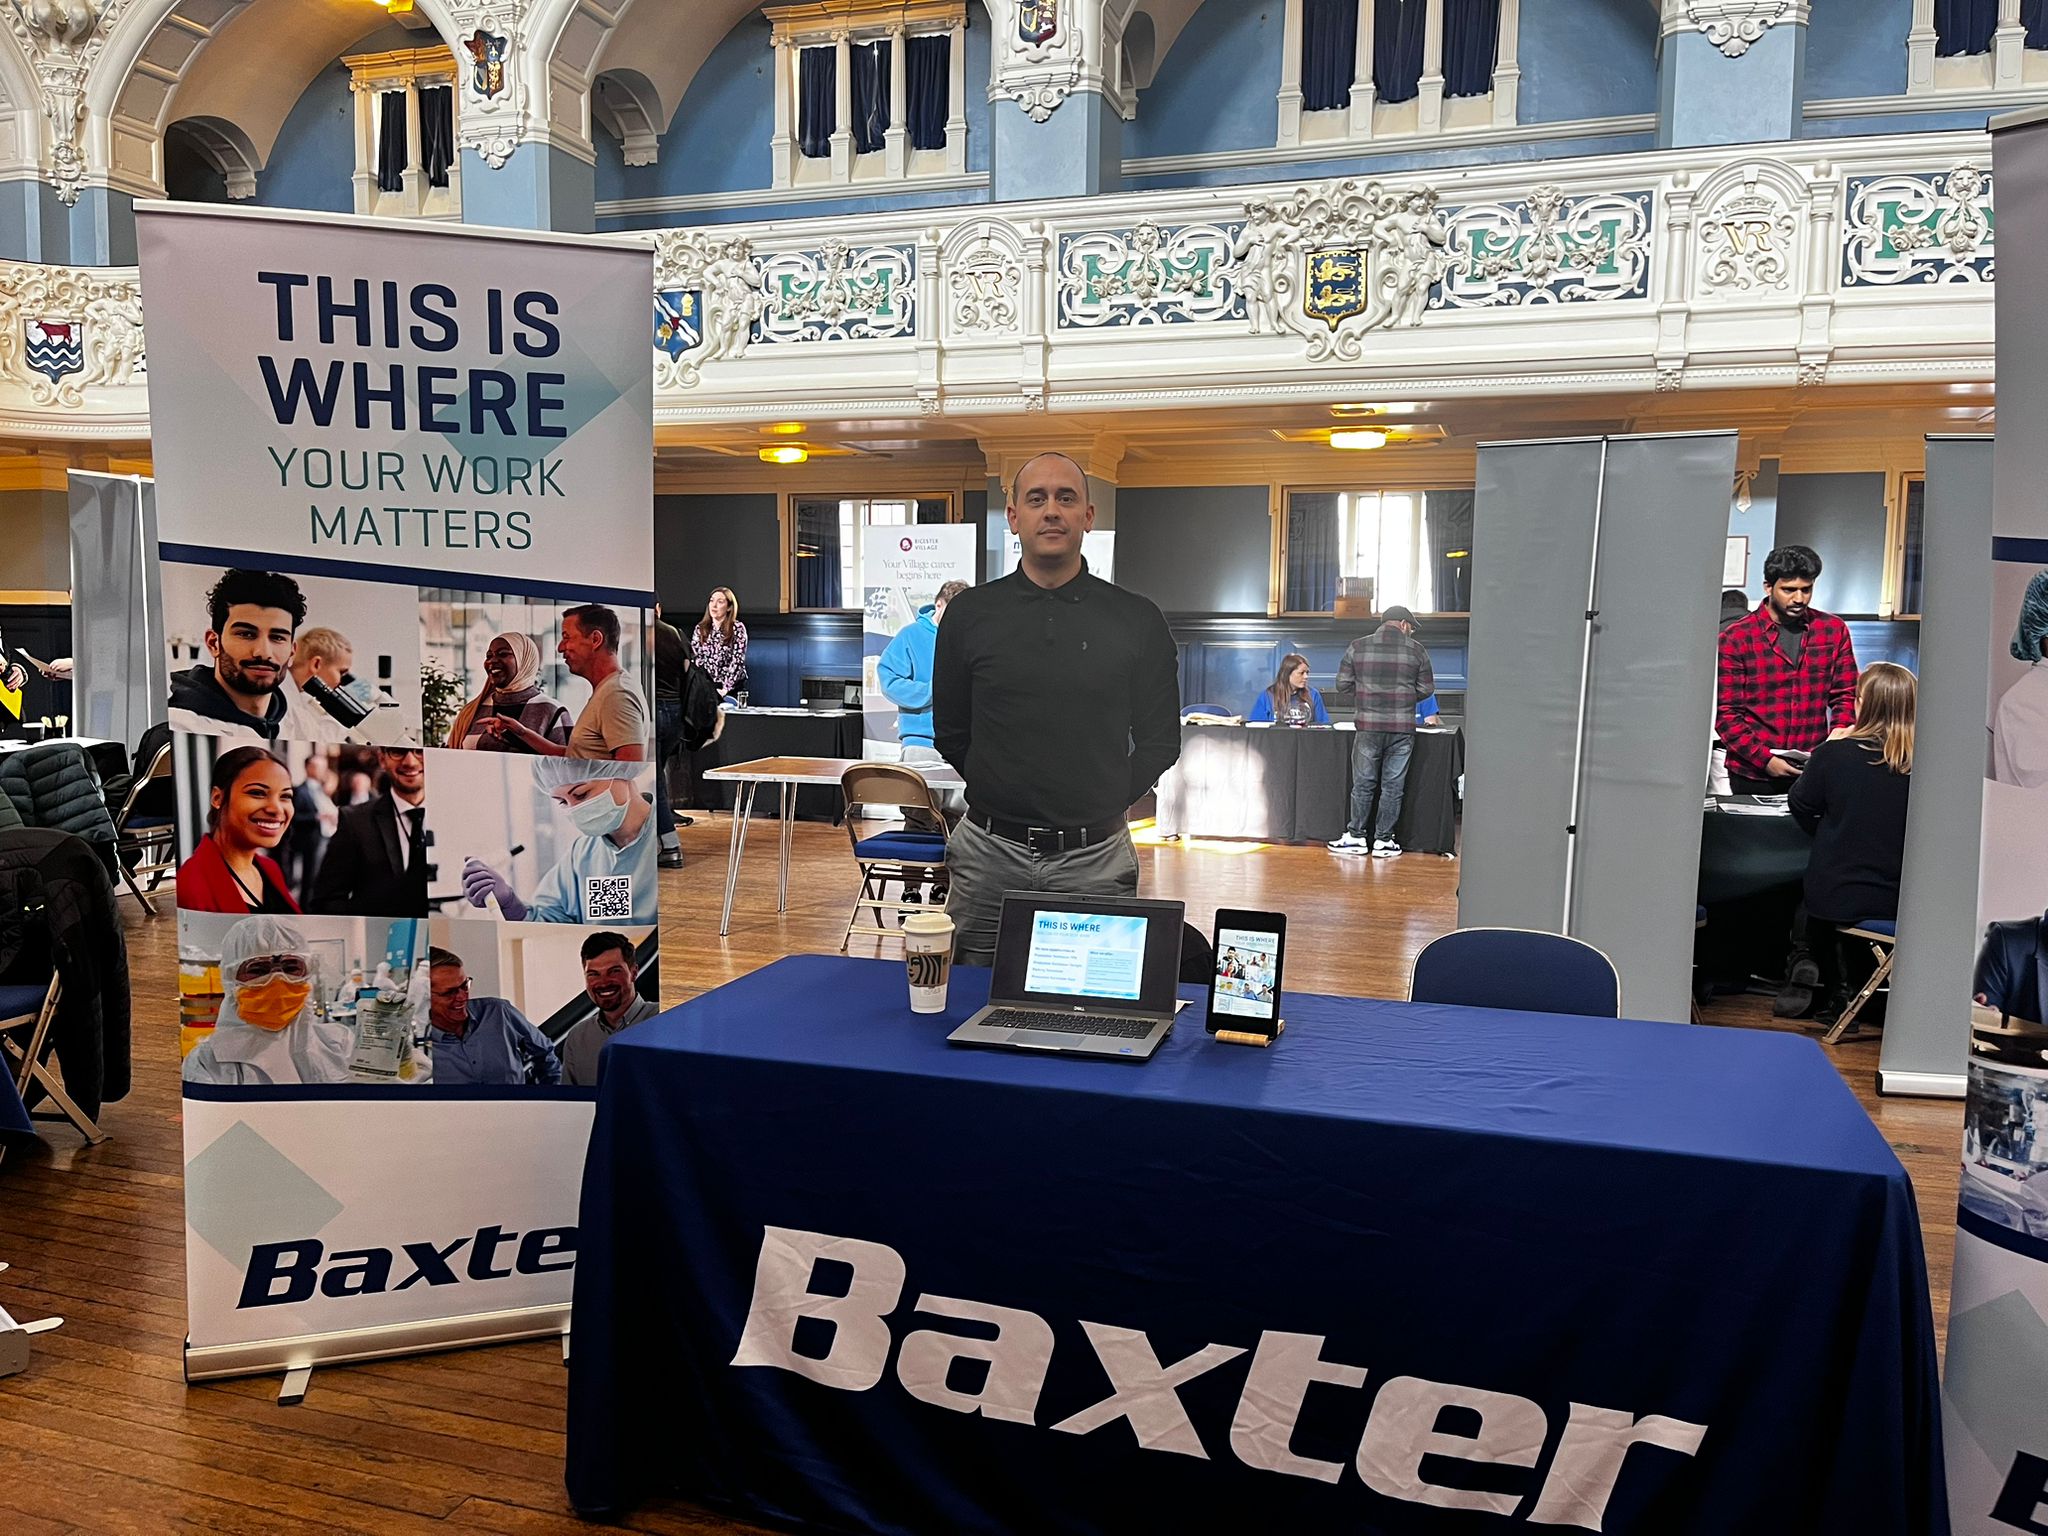 Baxter at our event in Oxford